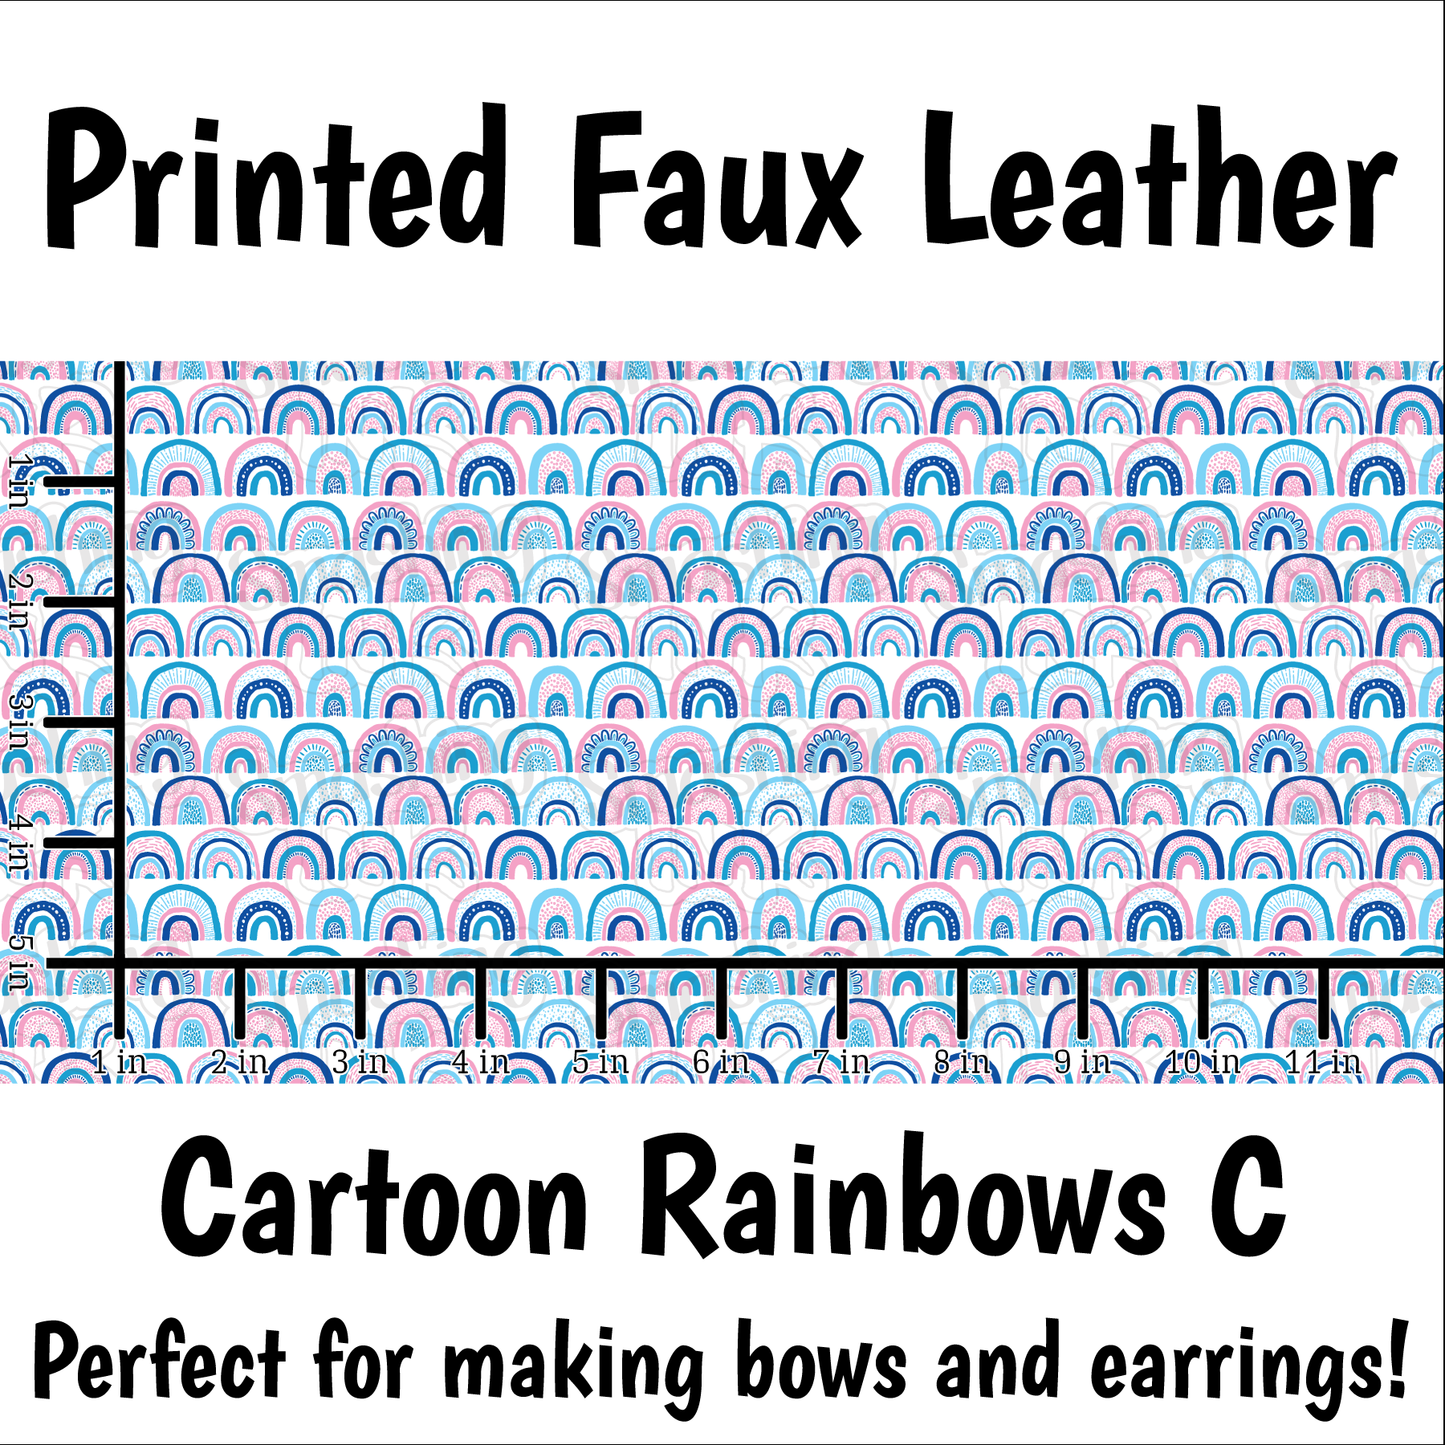 Cartoon Rainbows C - Faux Leather Sheet (SHIPS IN 3 BUS DAYS)